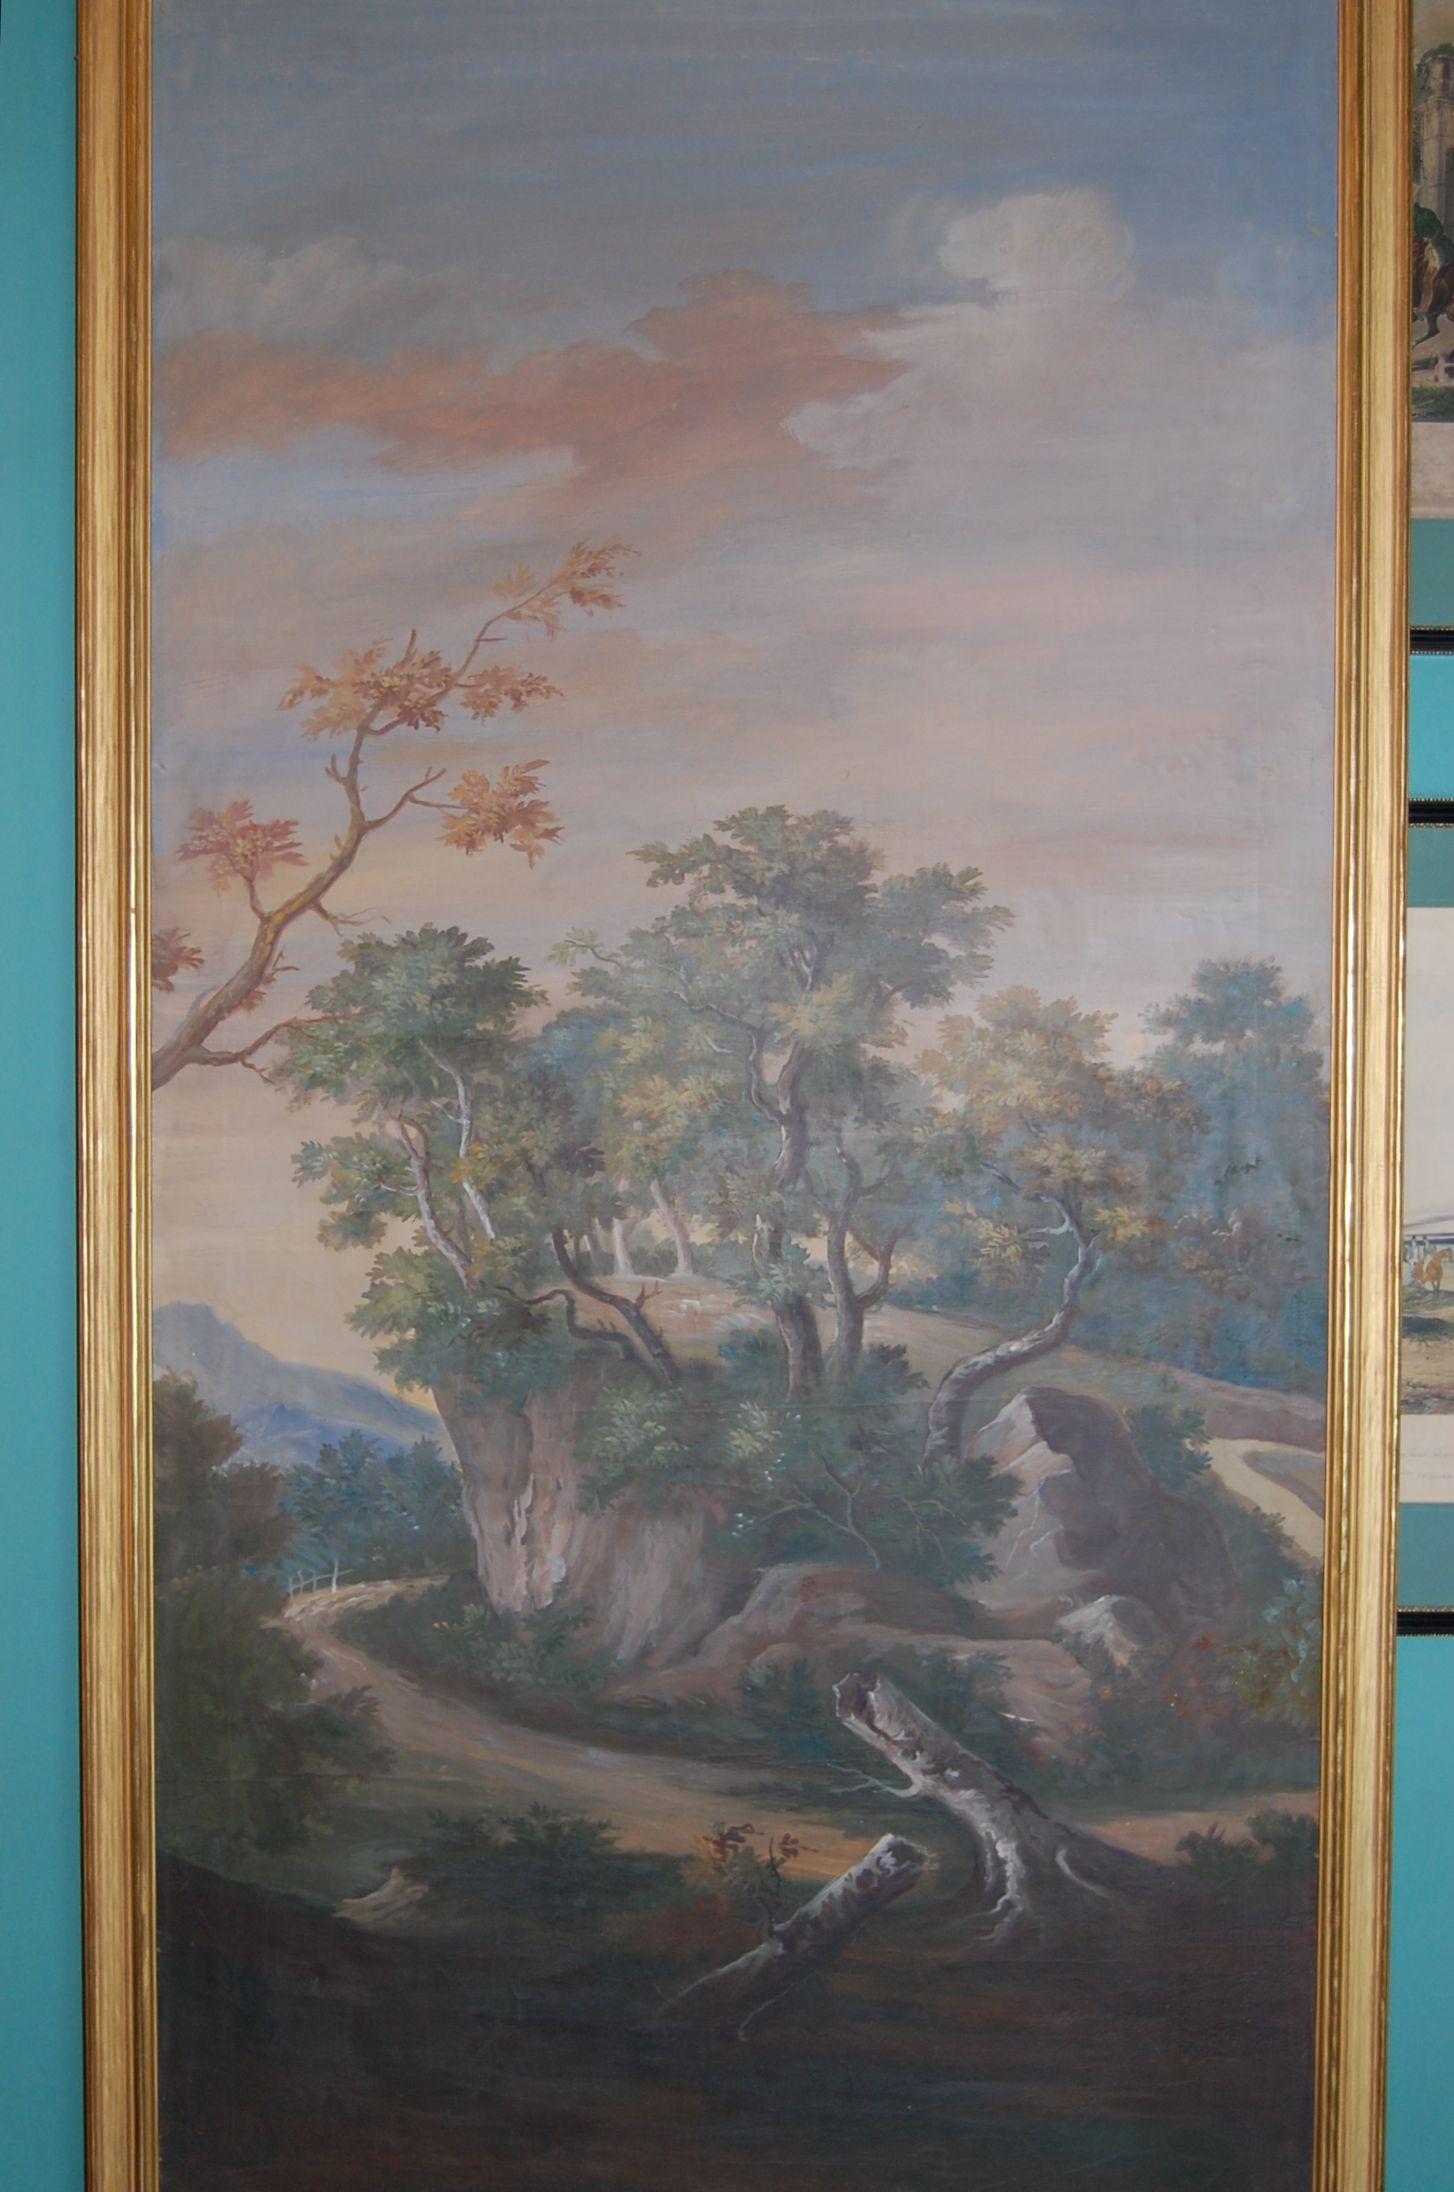 Painted Late 19th Century Italian Scenic Panel in Gold Leaf Frame (Italienisch)